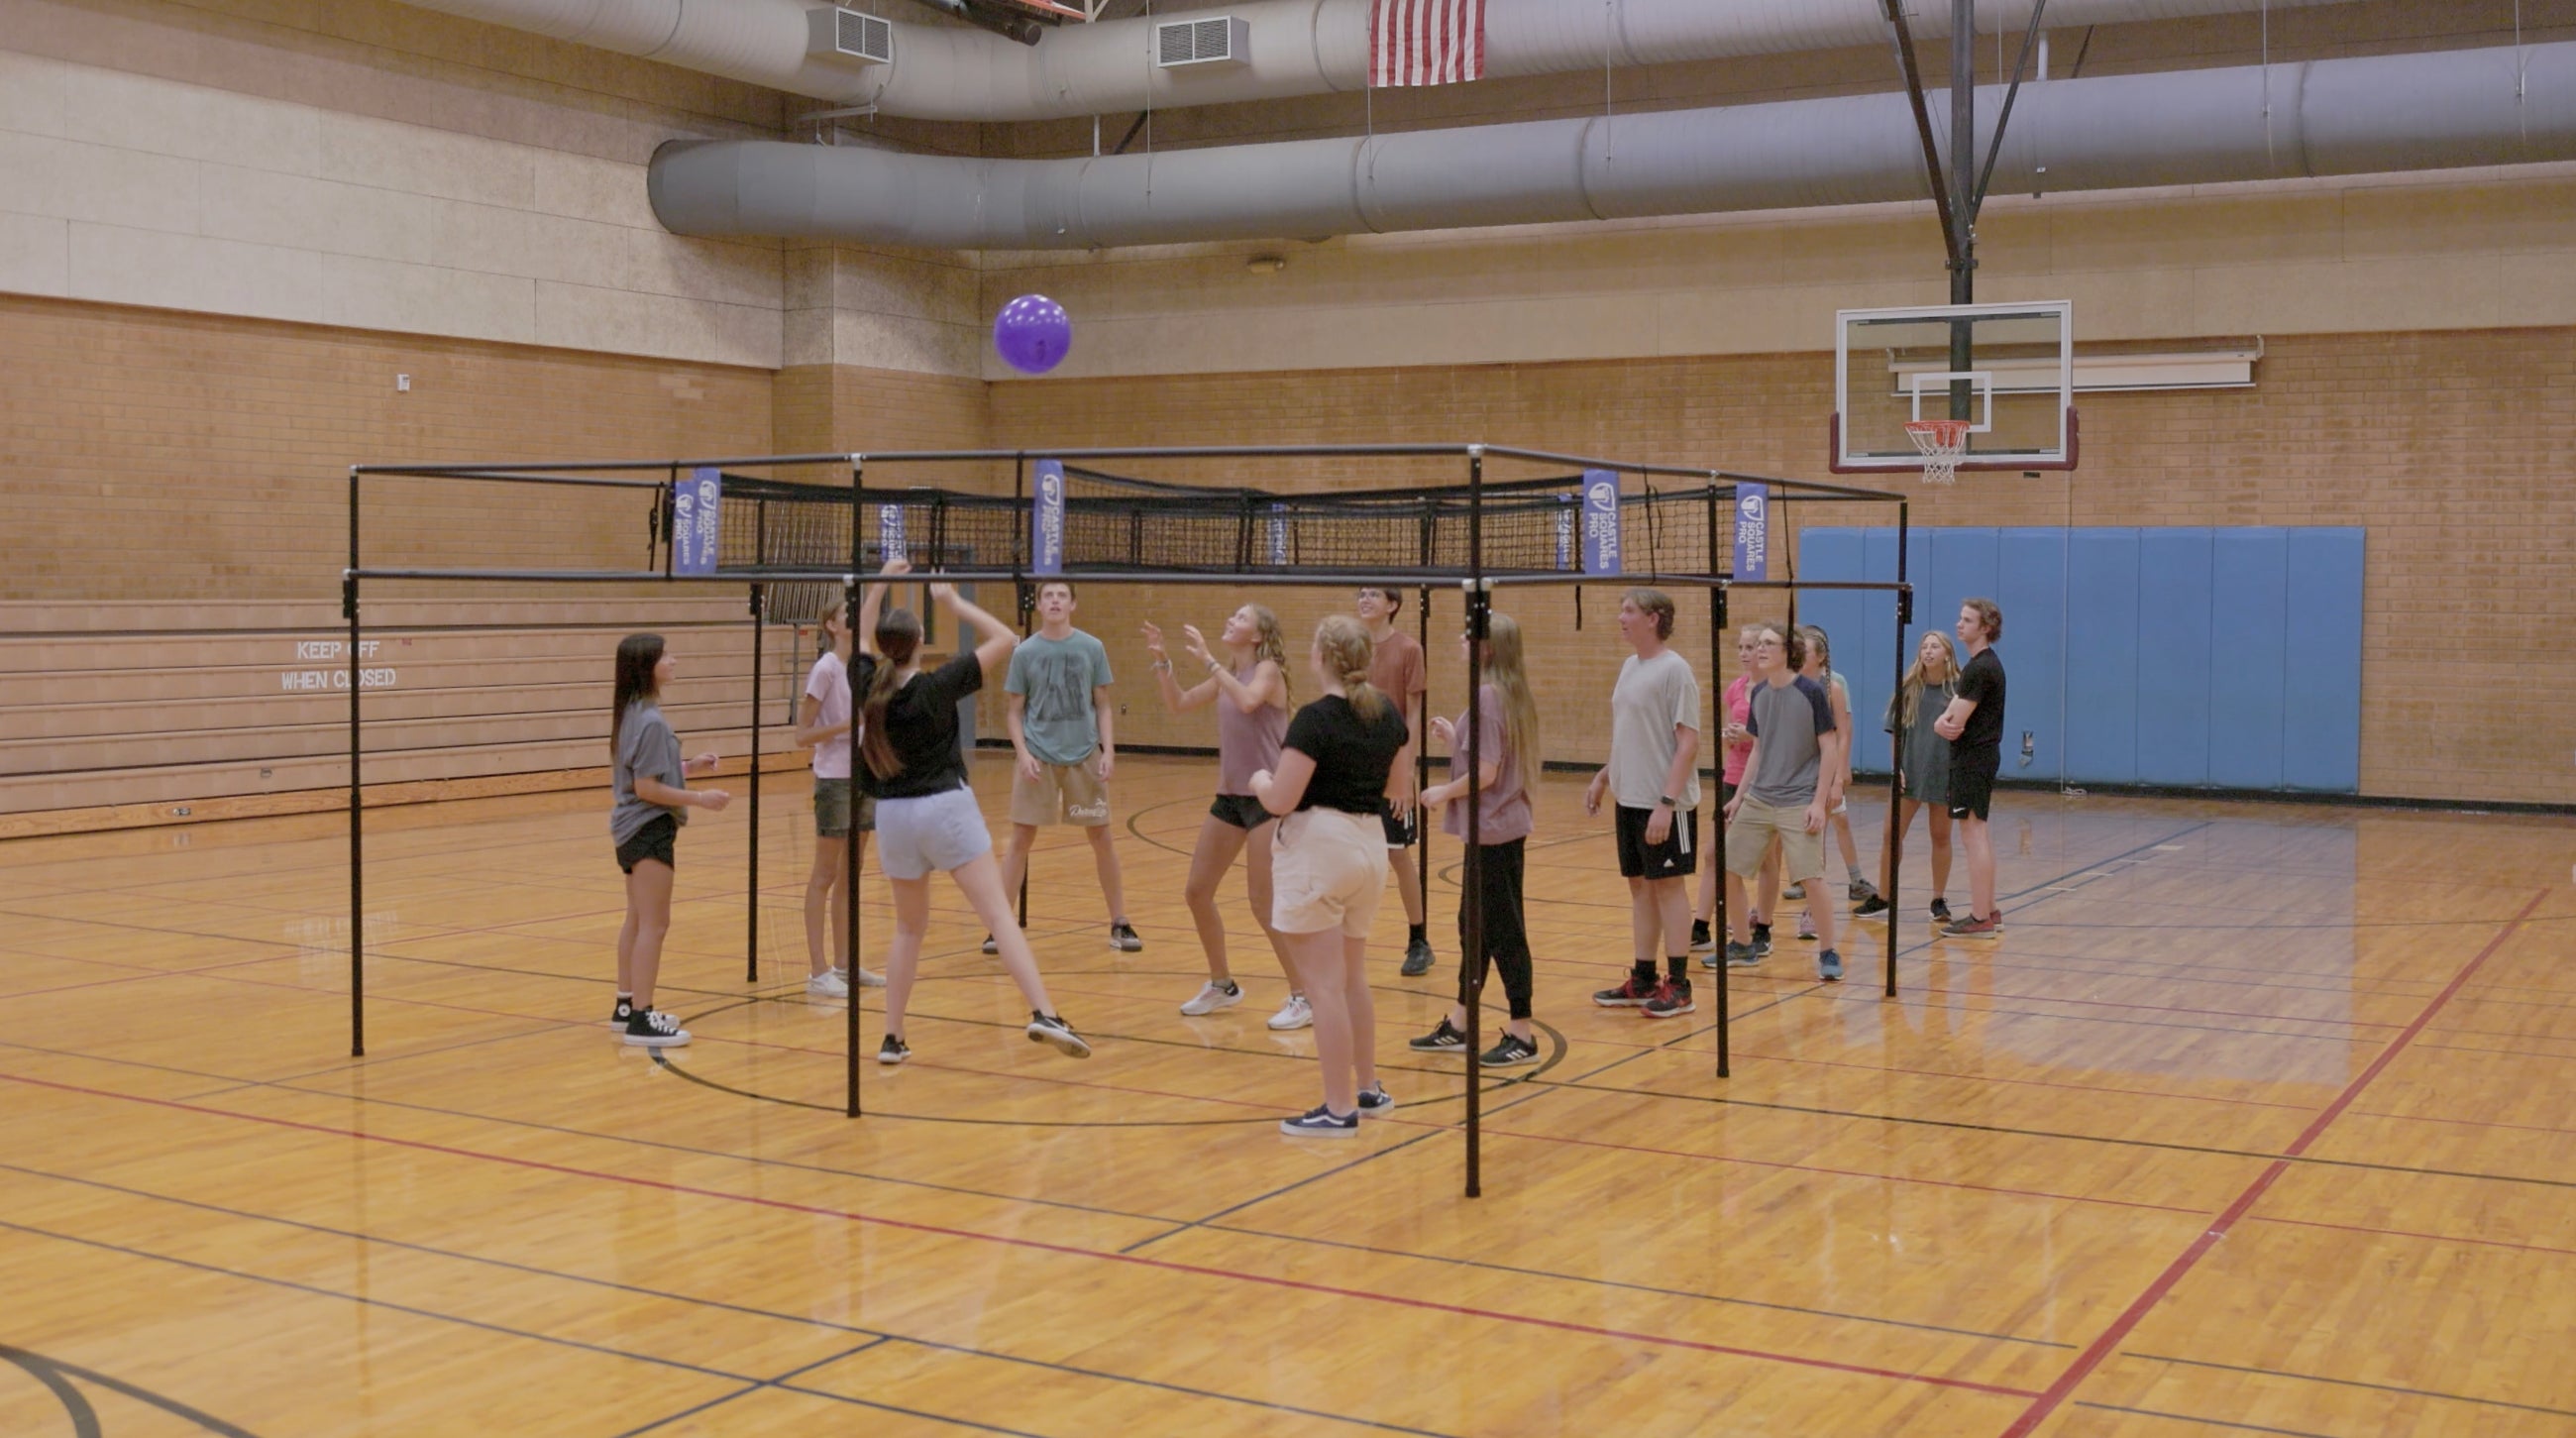 17 Awesome TAG Games You Should be Playing in P.E. Class